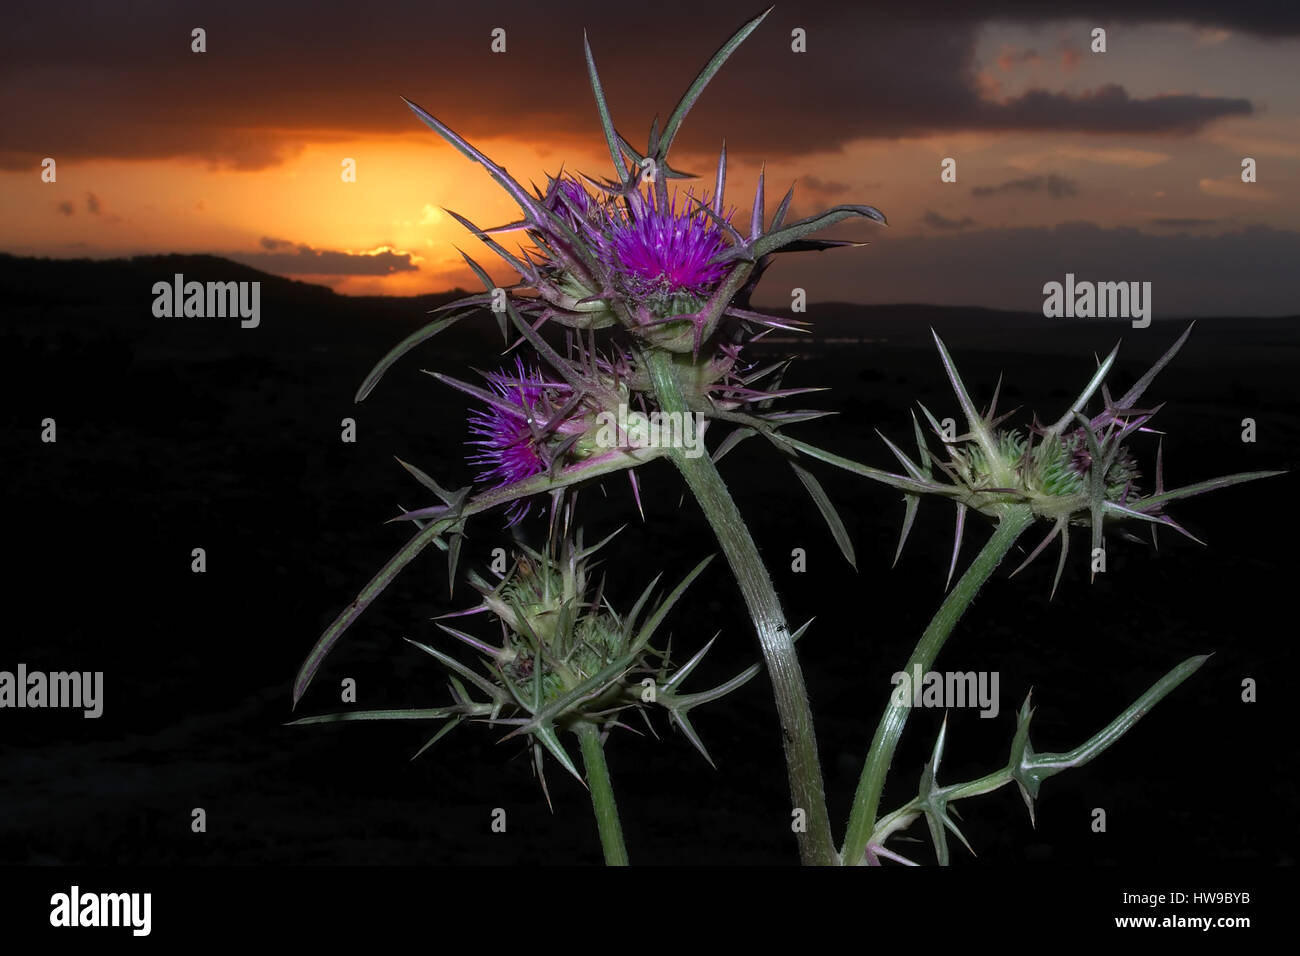 Thorn flowers in the sunset Stock Photo